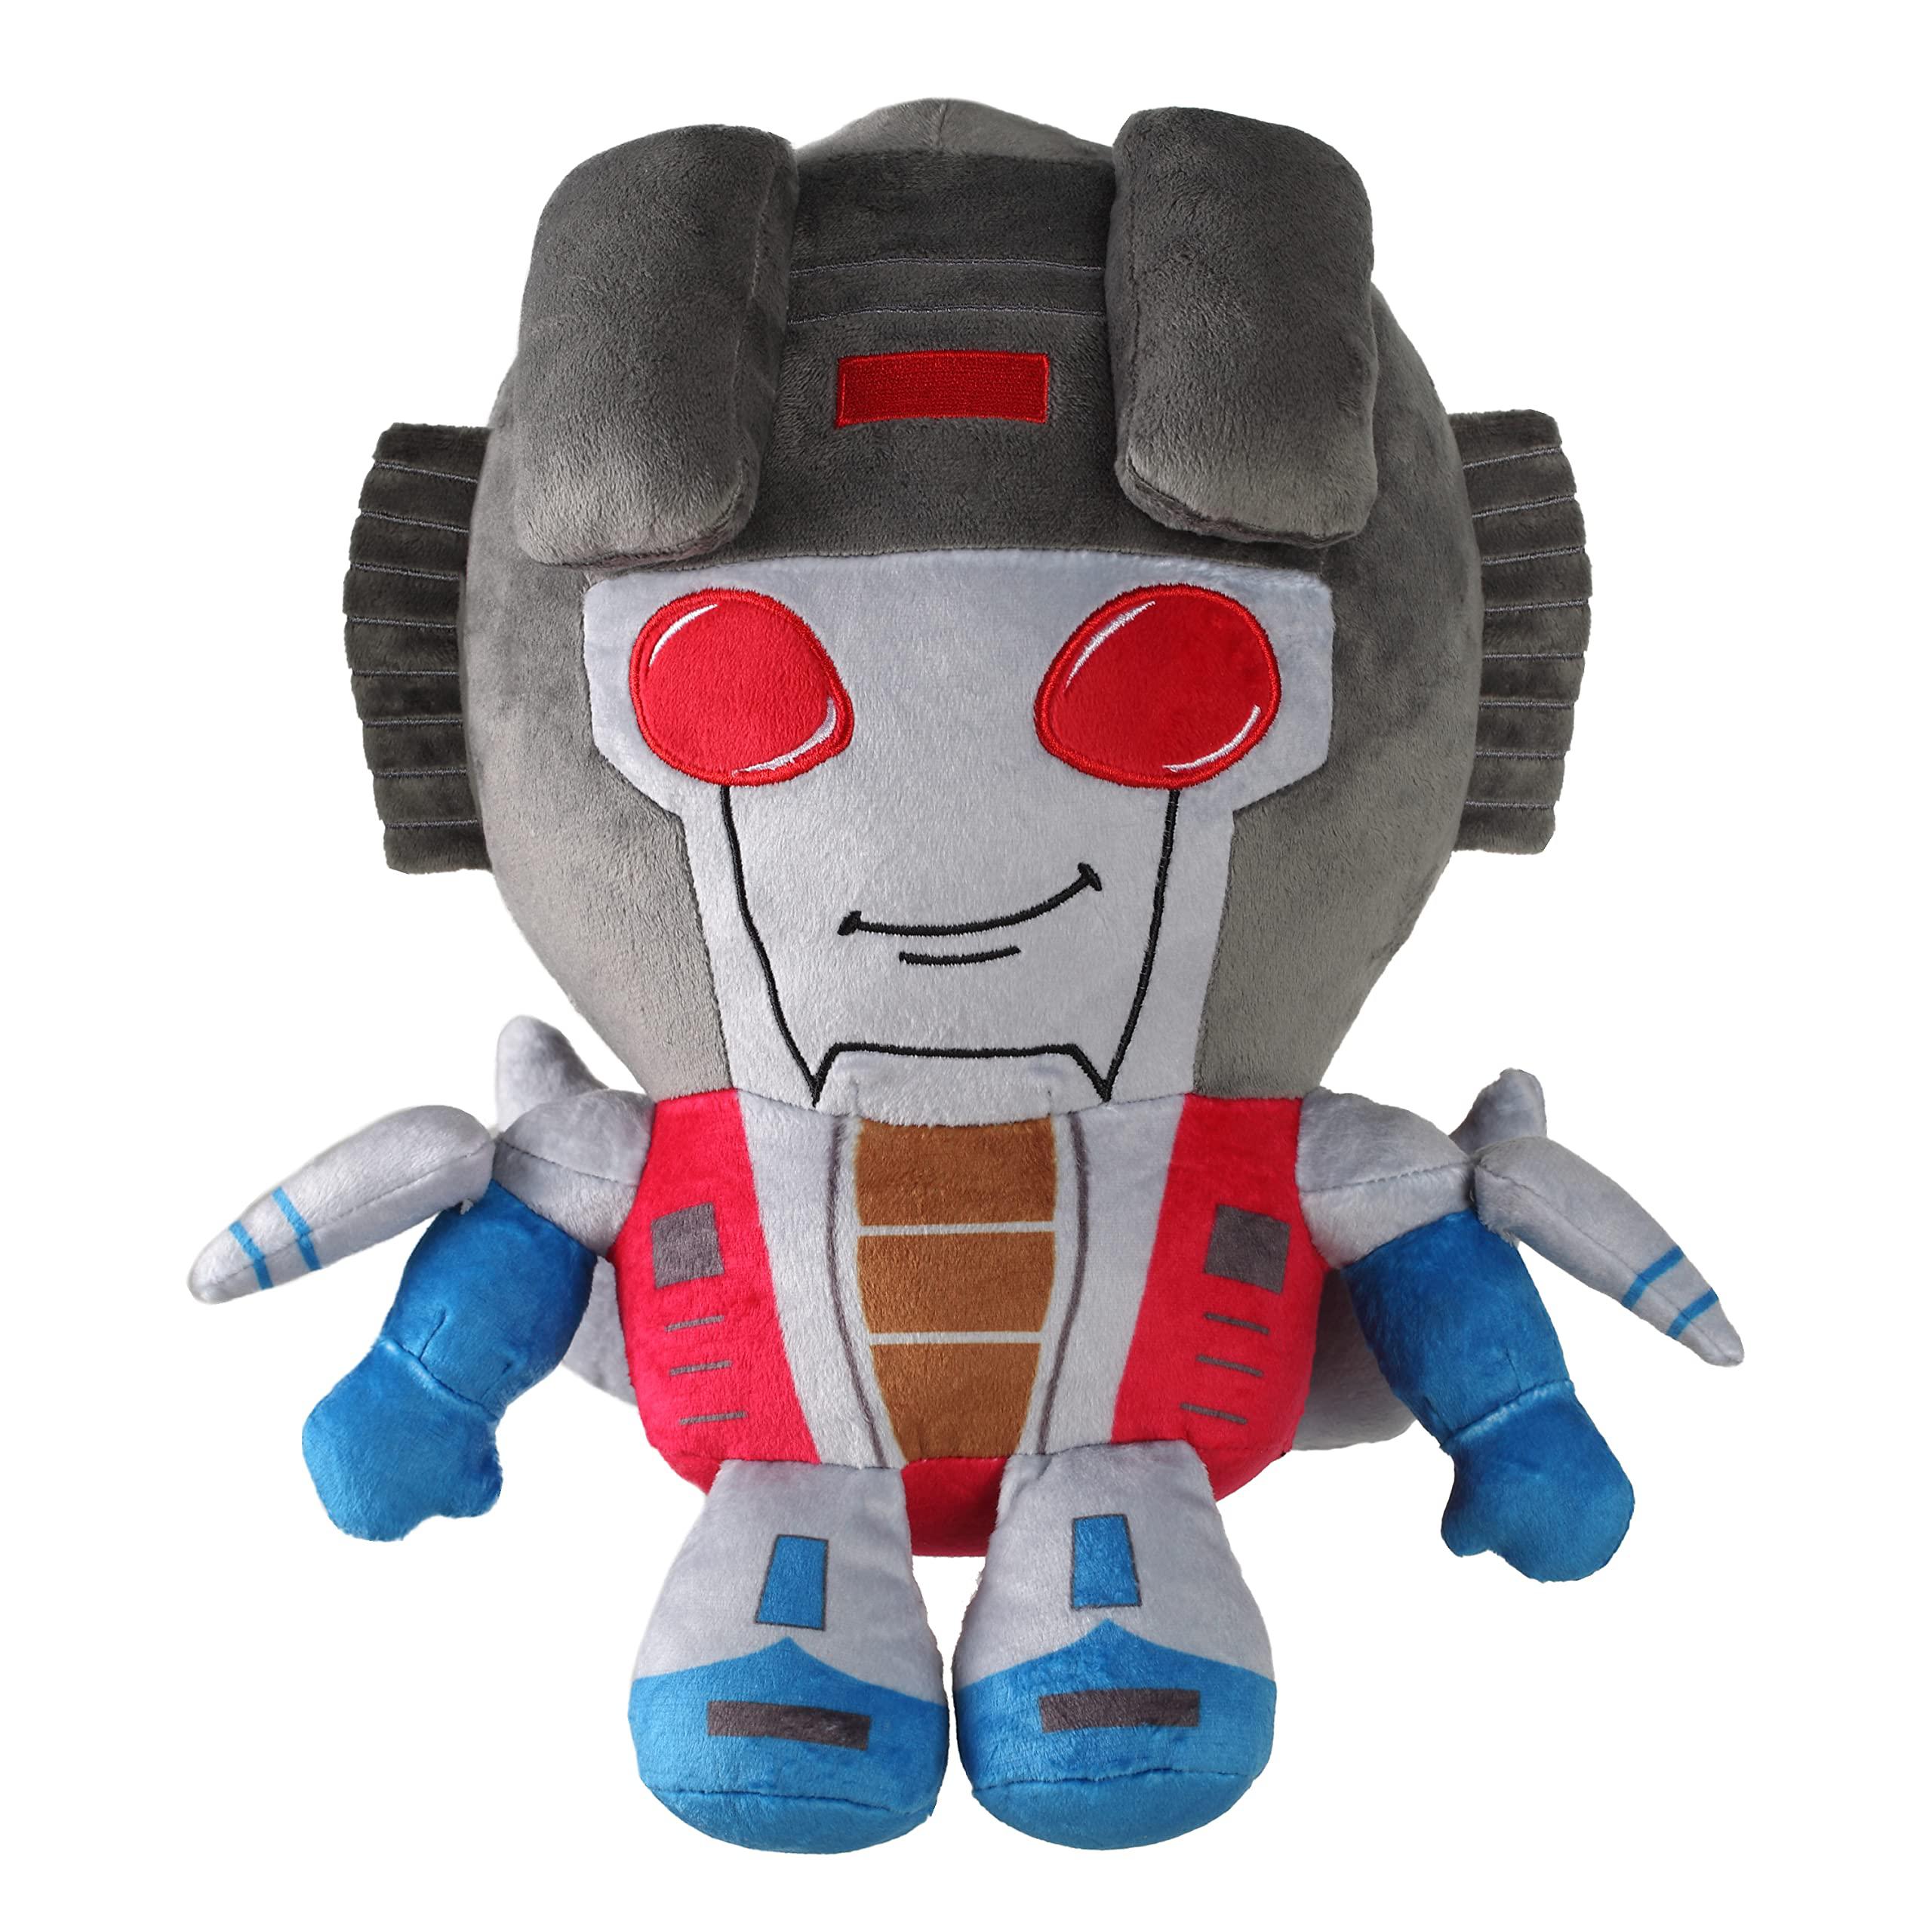 Symbiote Studios transformers | starscream plush toy | 12 inch soft minky plush fabric | officially licensed product | ages 3+